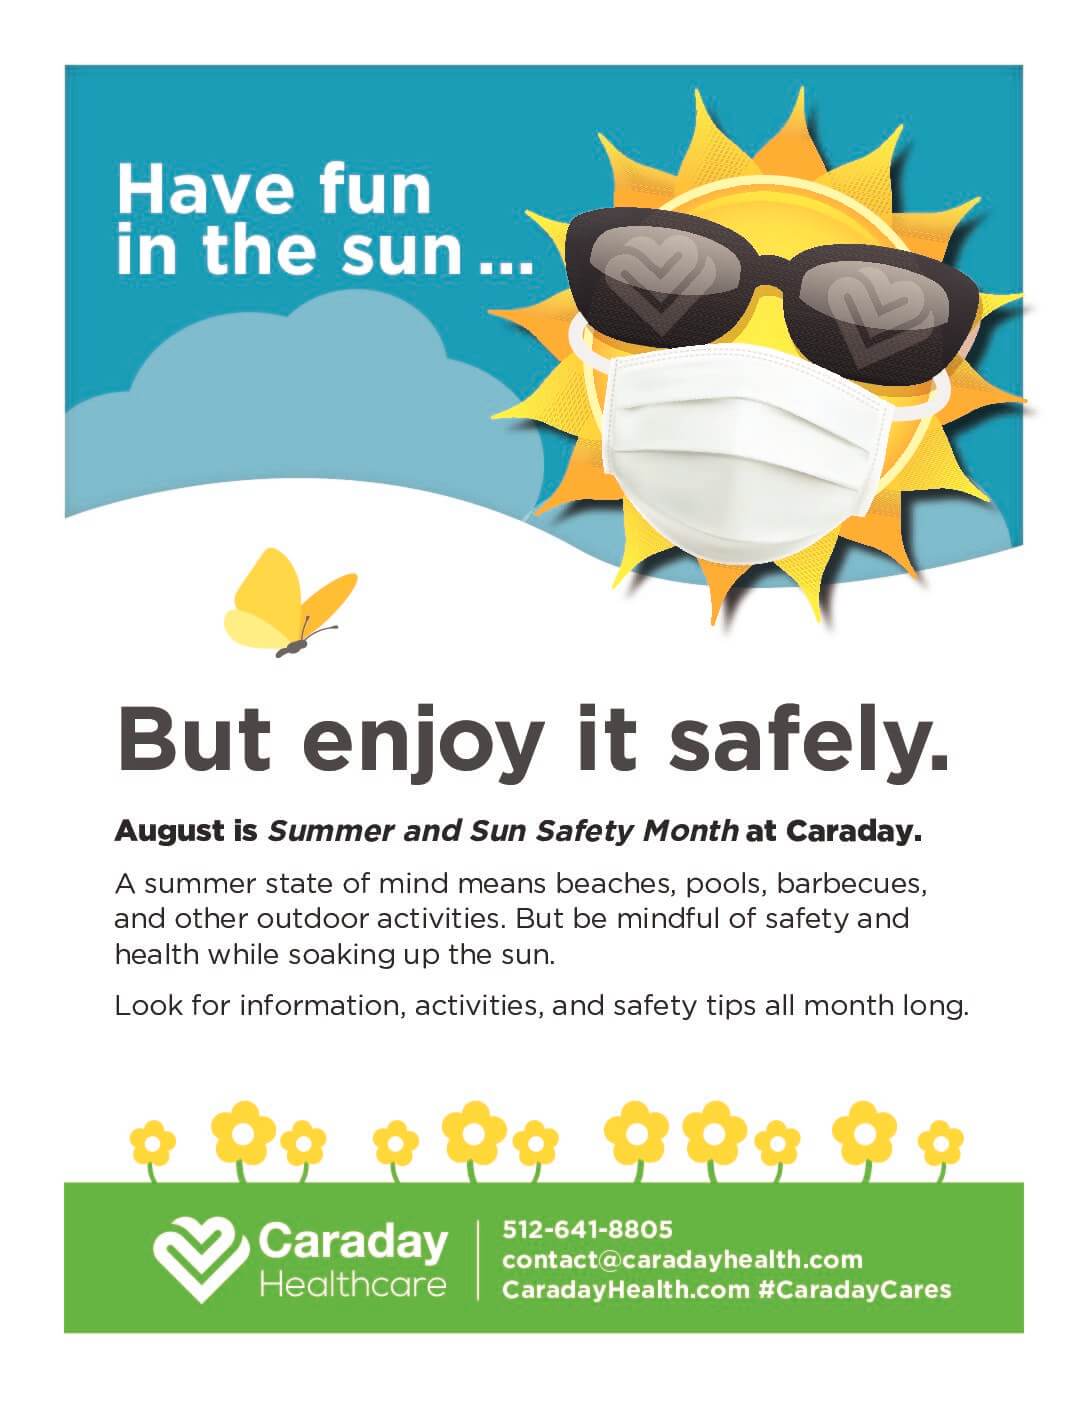 Have fun in the sun...but enjoy it safely